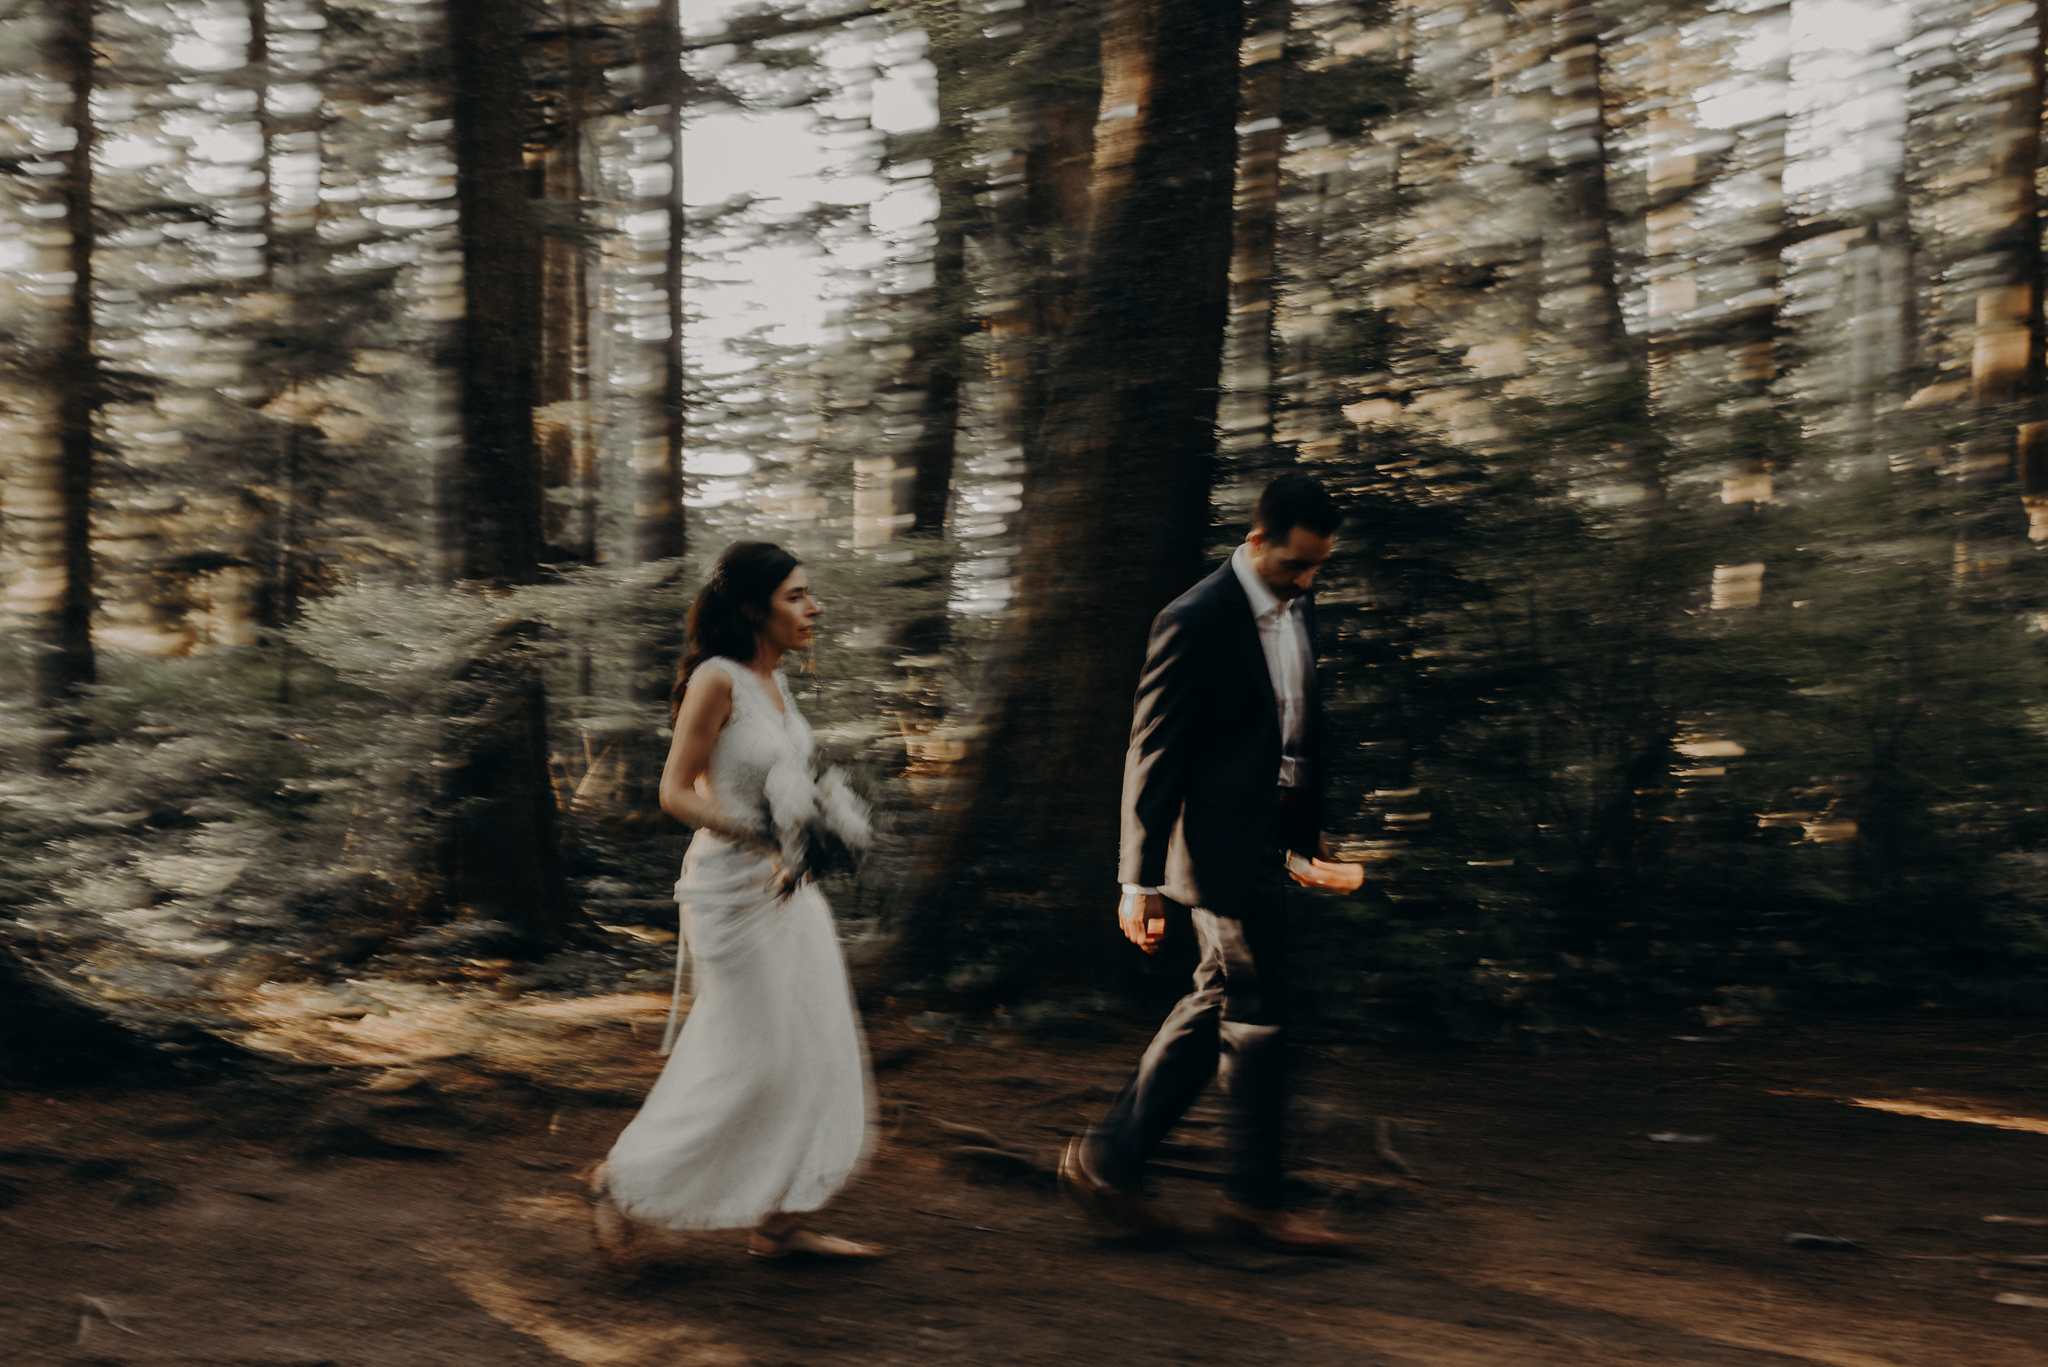 Isaiah + Taylor Photography - Cape Flattery Elopement, Olympia National Forest Wedding Photographer-123.jpg